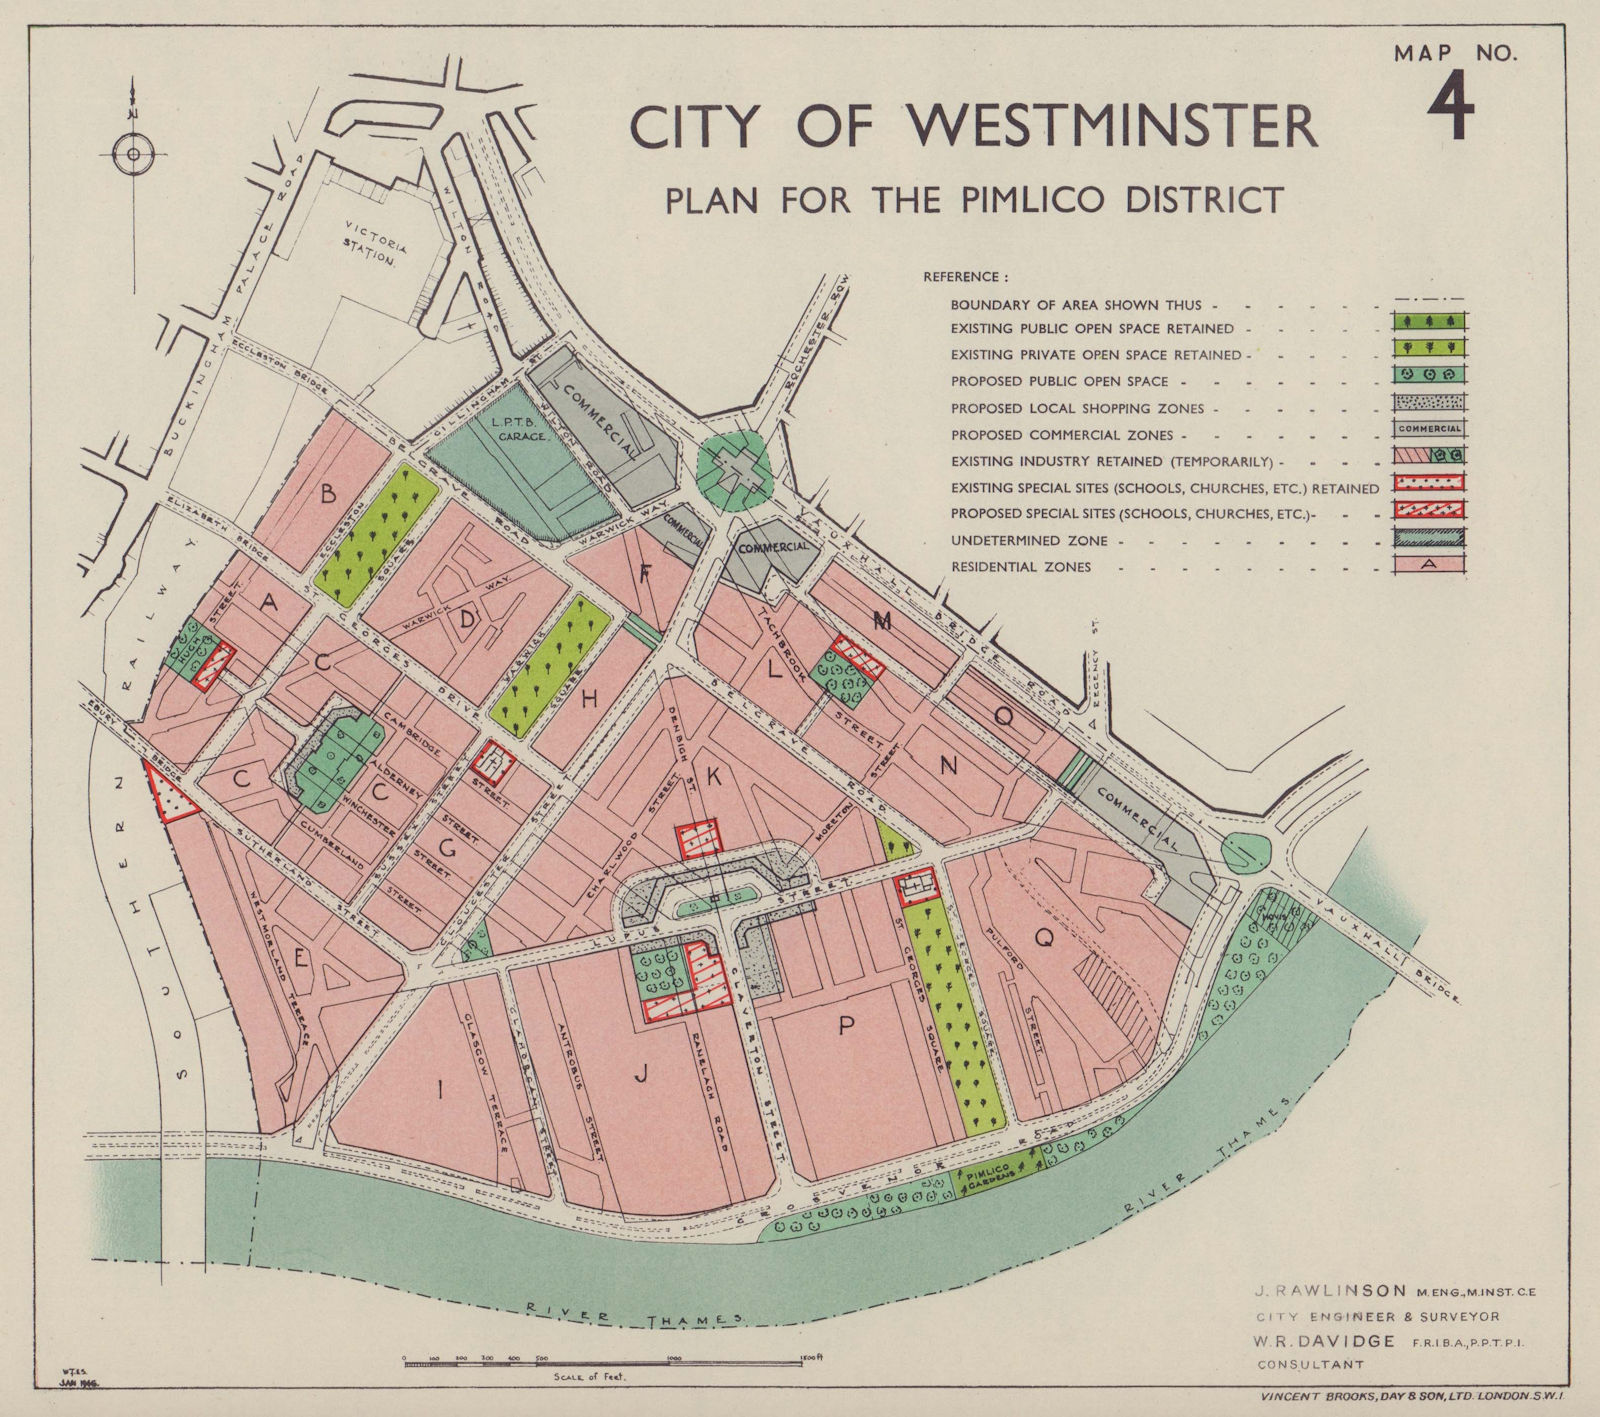 City of Westminster plan for the redevelopment of Pimlico. RAWLINSON 1946 map